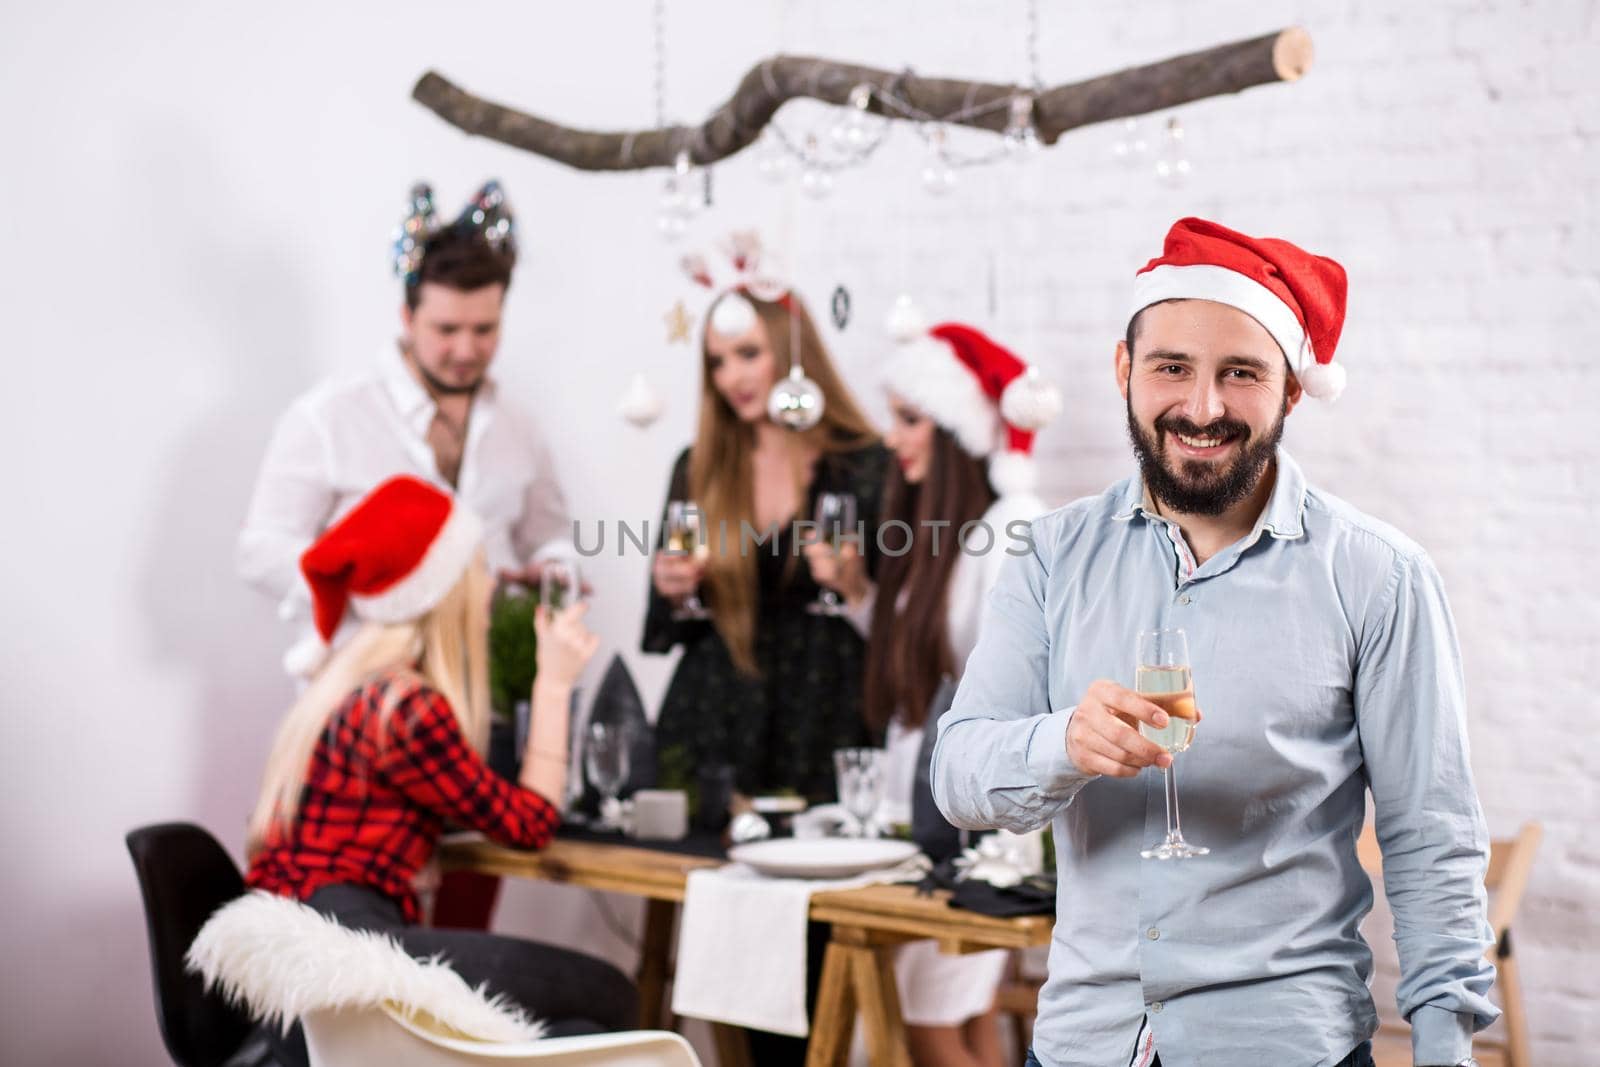 Shot of happy friends enjoying holidays. Focus on the man in the foreground in a red Christmas hat by nazarovsergey